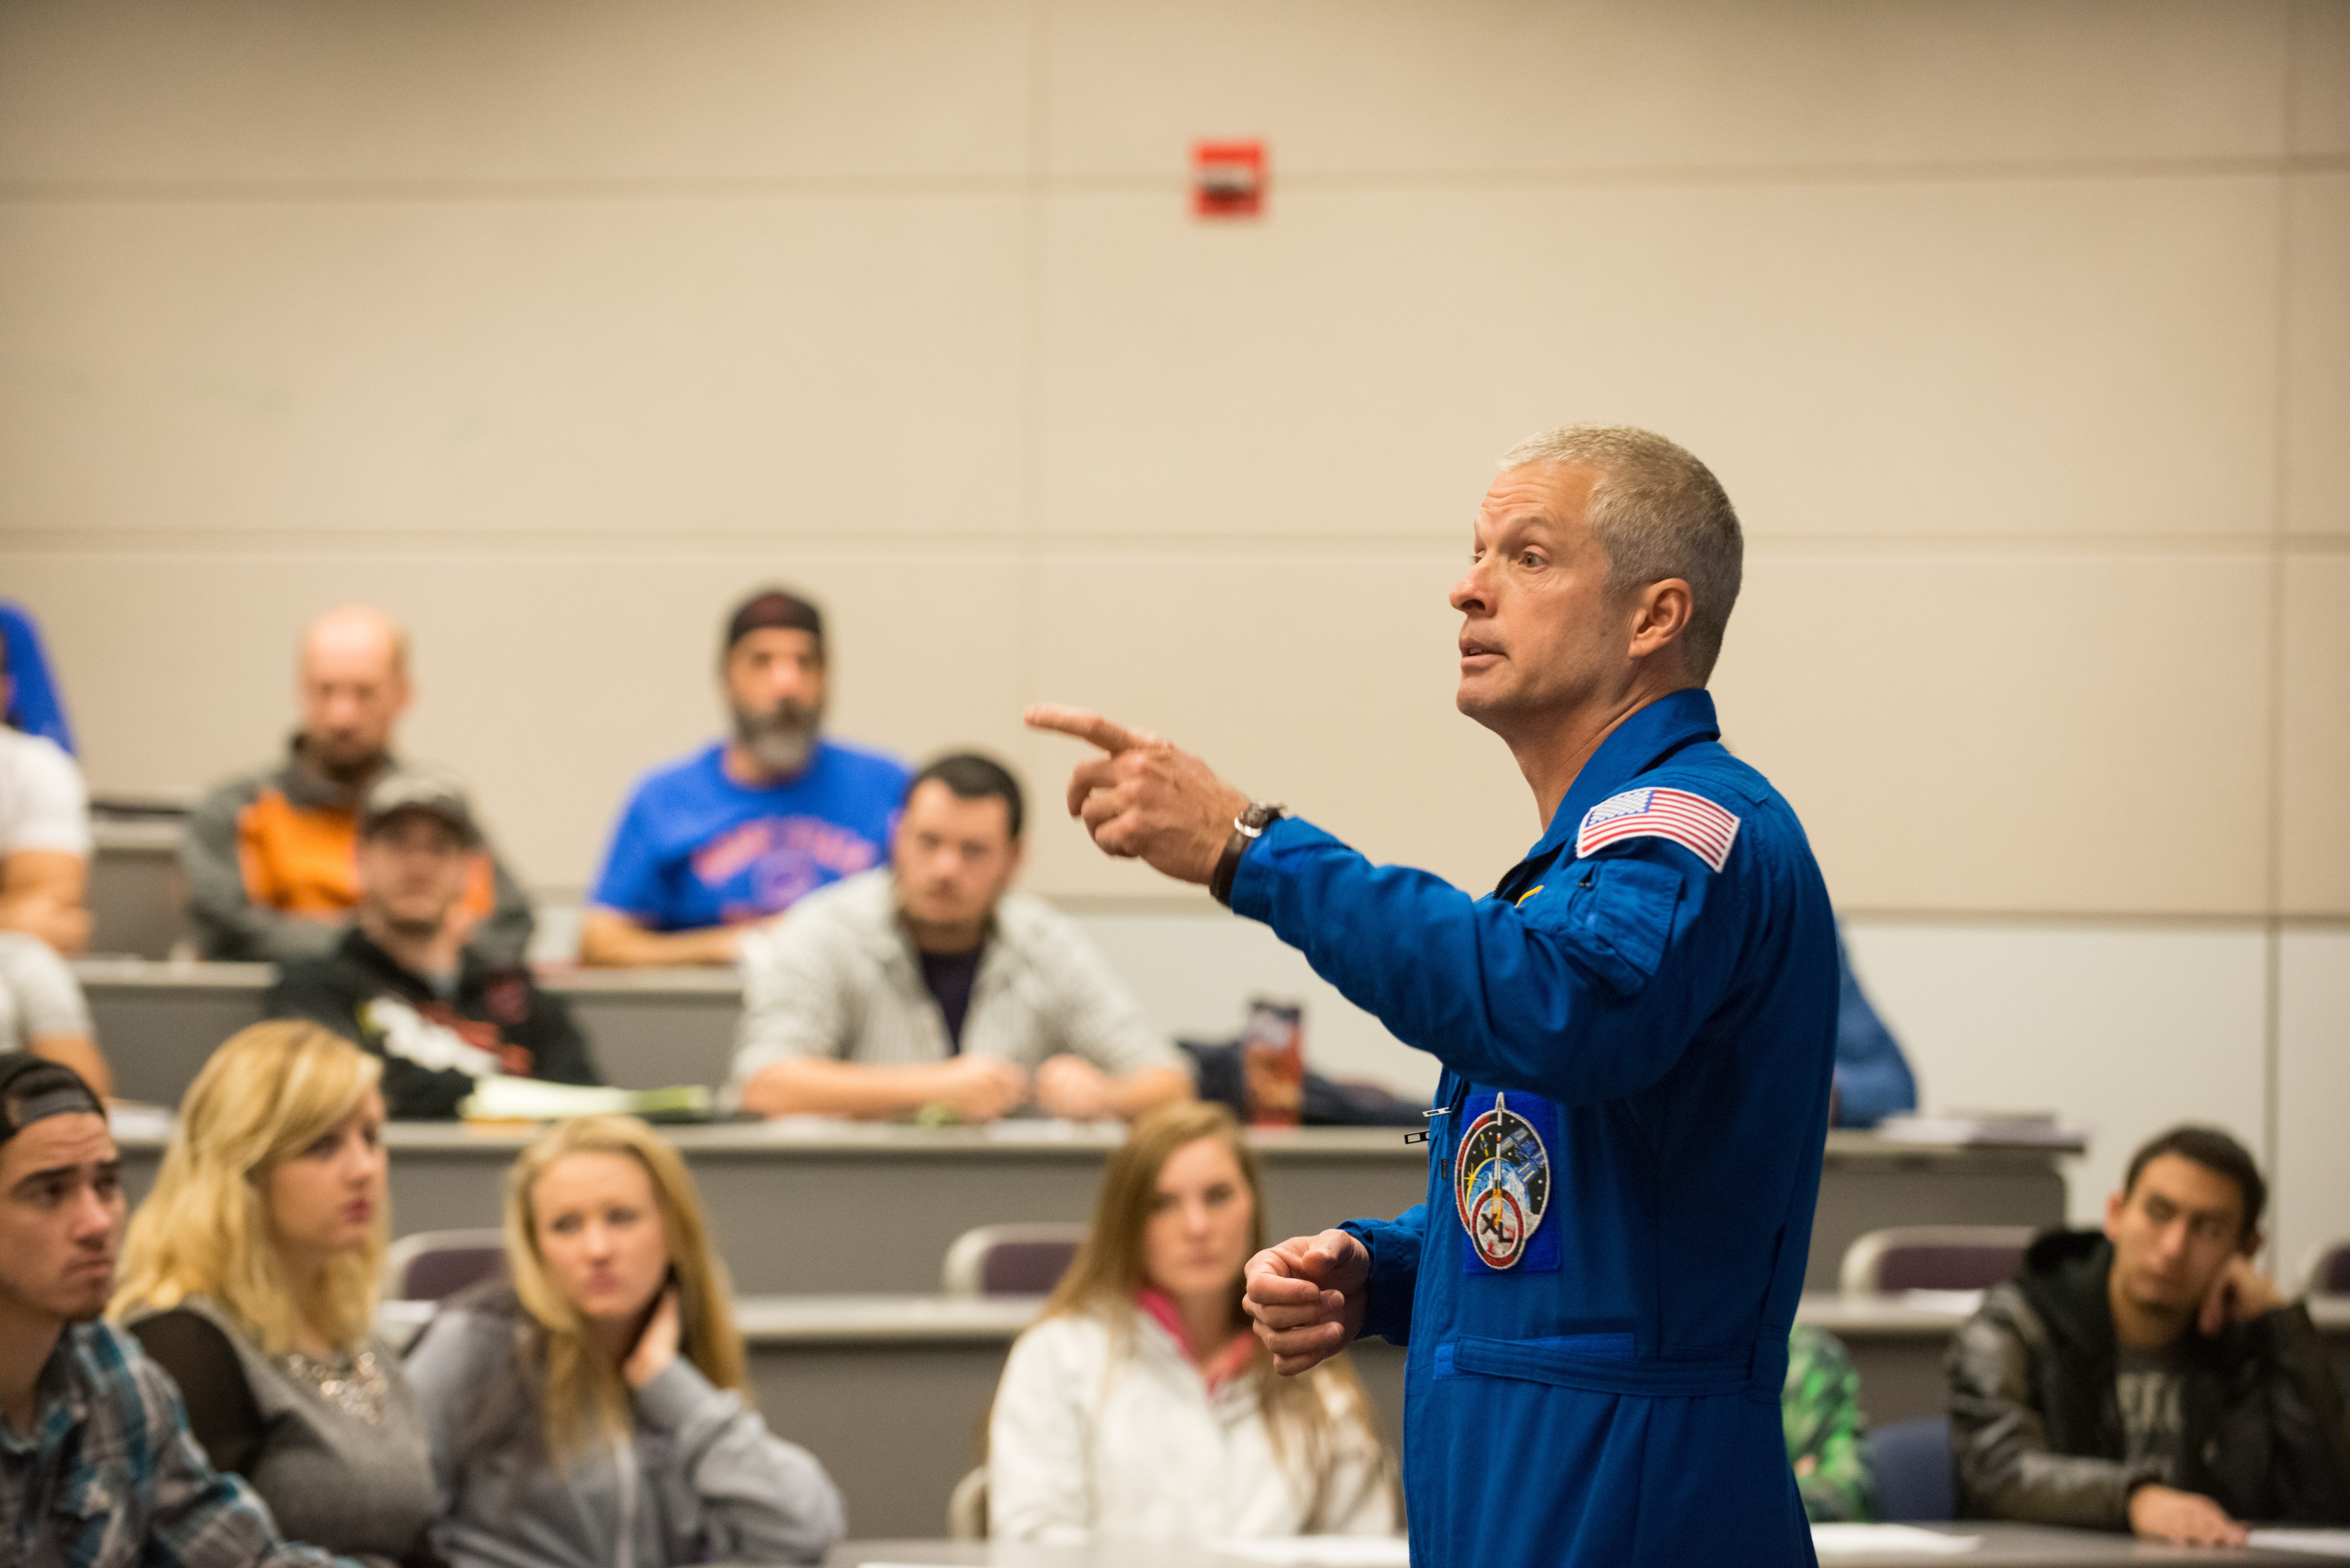 Astronaut Steve Swanson speaking to classroom of students